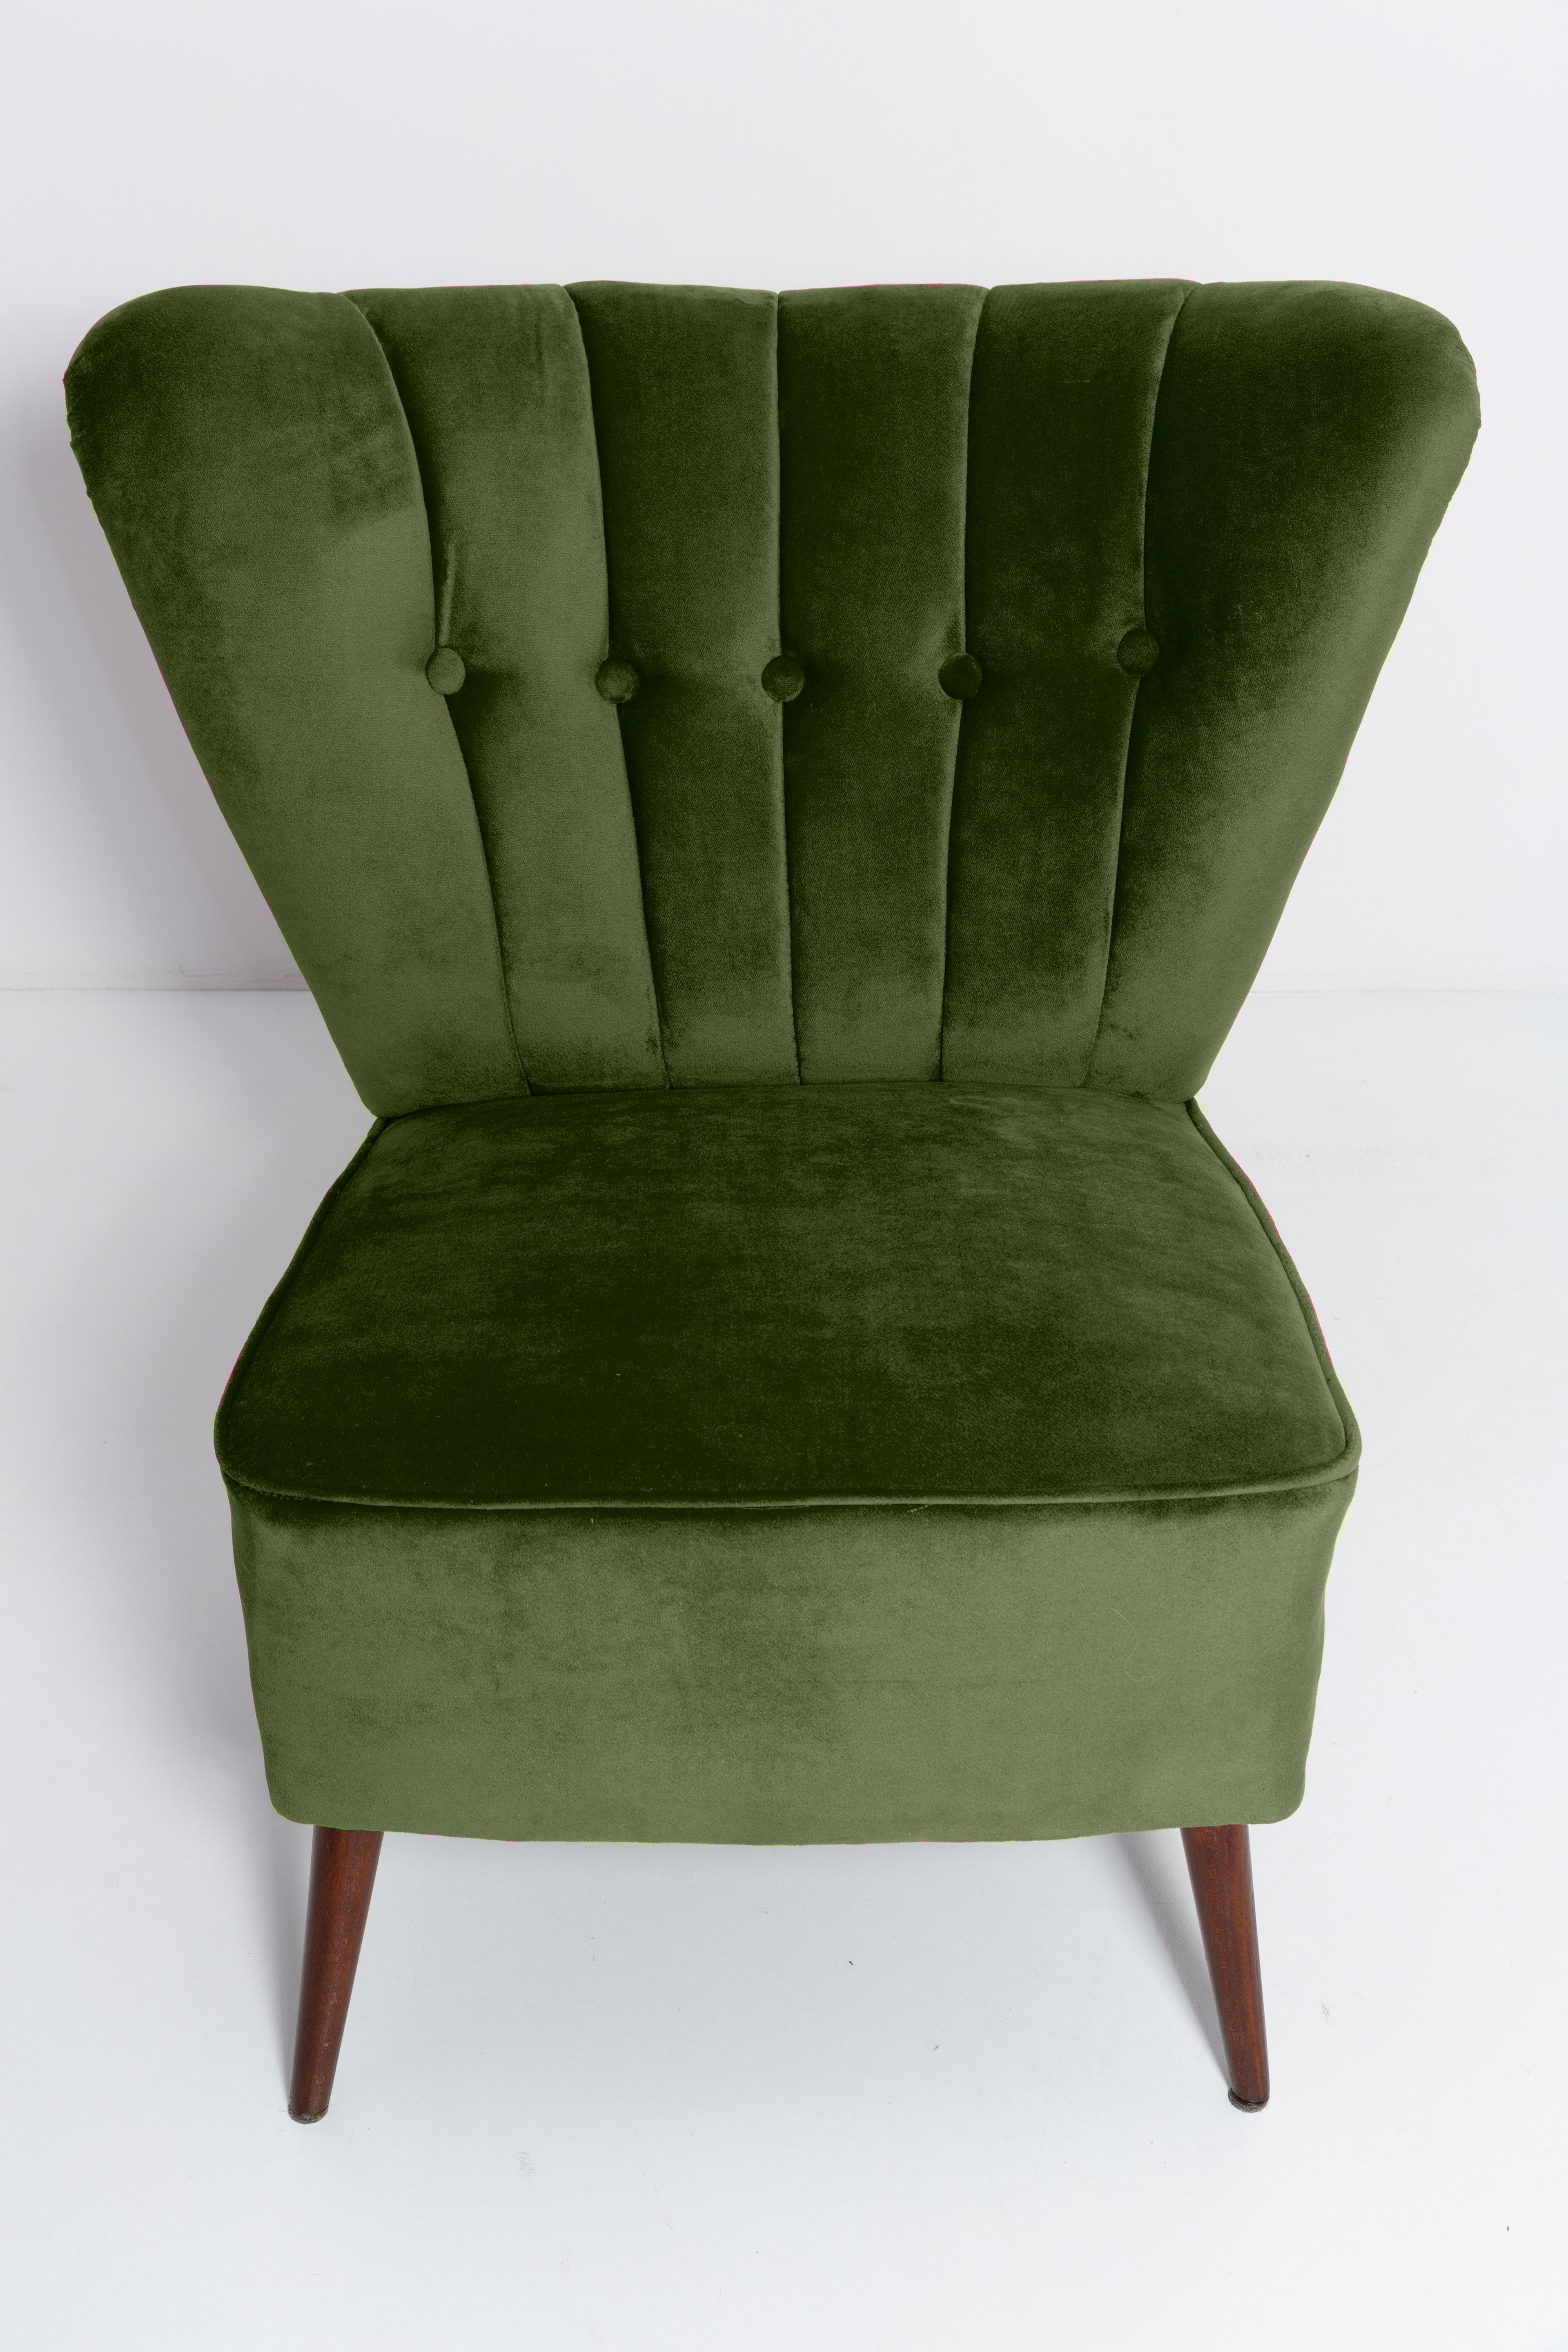 20th Century Set of Two Mid-Century Green Velvet Club Armchairs, Europe, 1960s For Sale